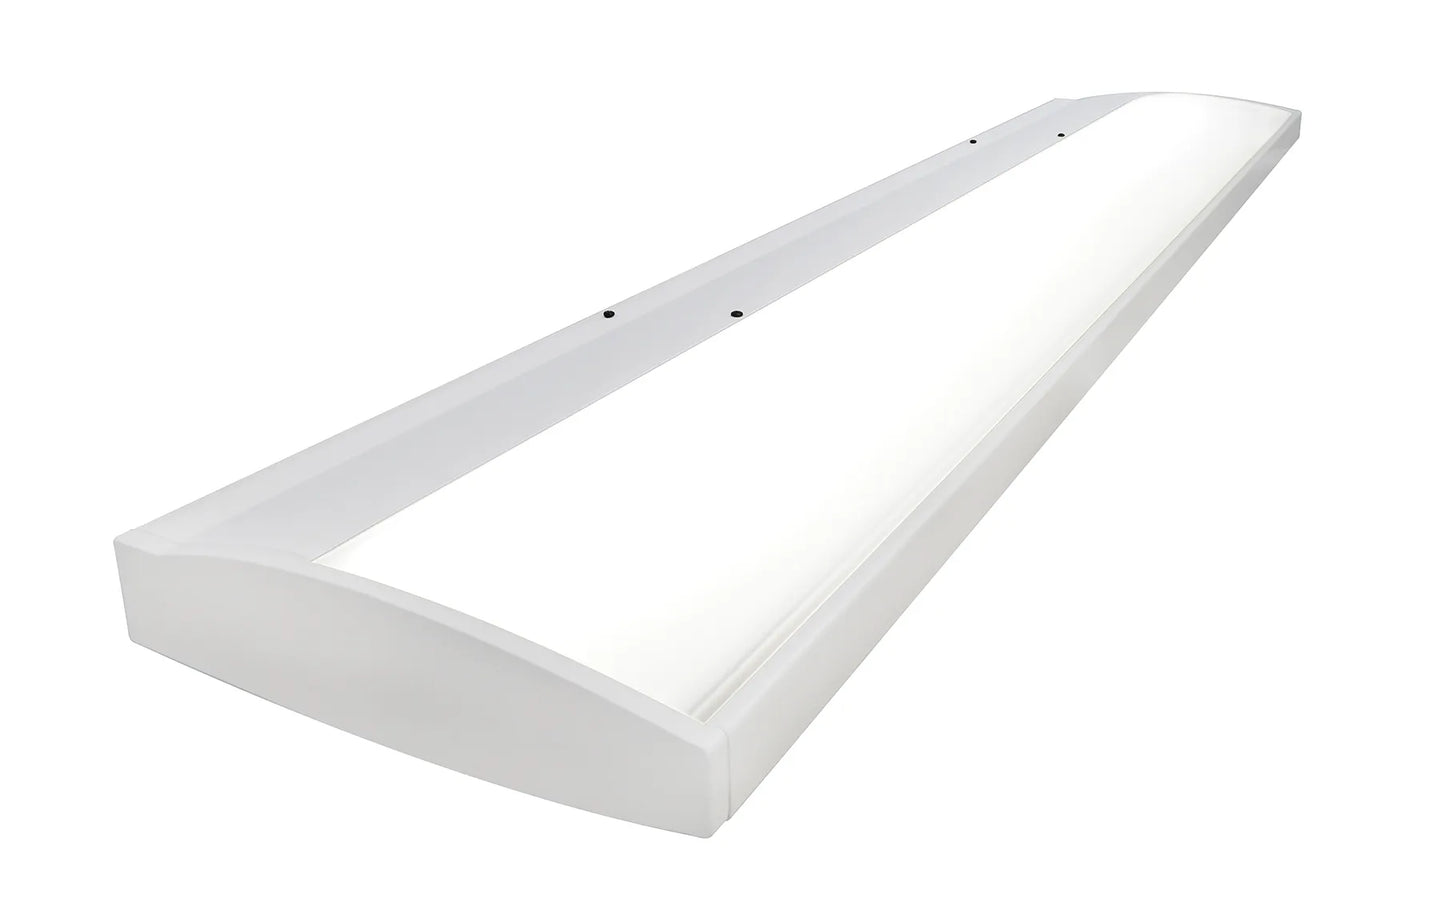 Waldmann AMA33500A-00; AMADEA Bed Light, White, 3500K, 41 Inches, 1-10V Dimmable